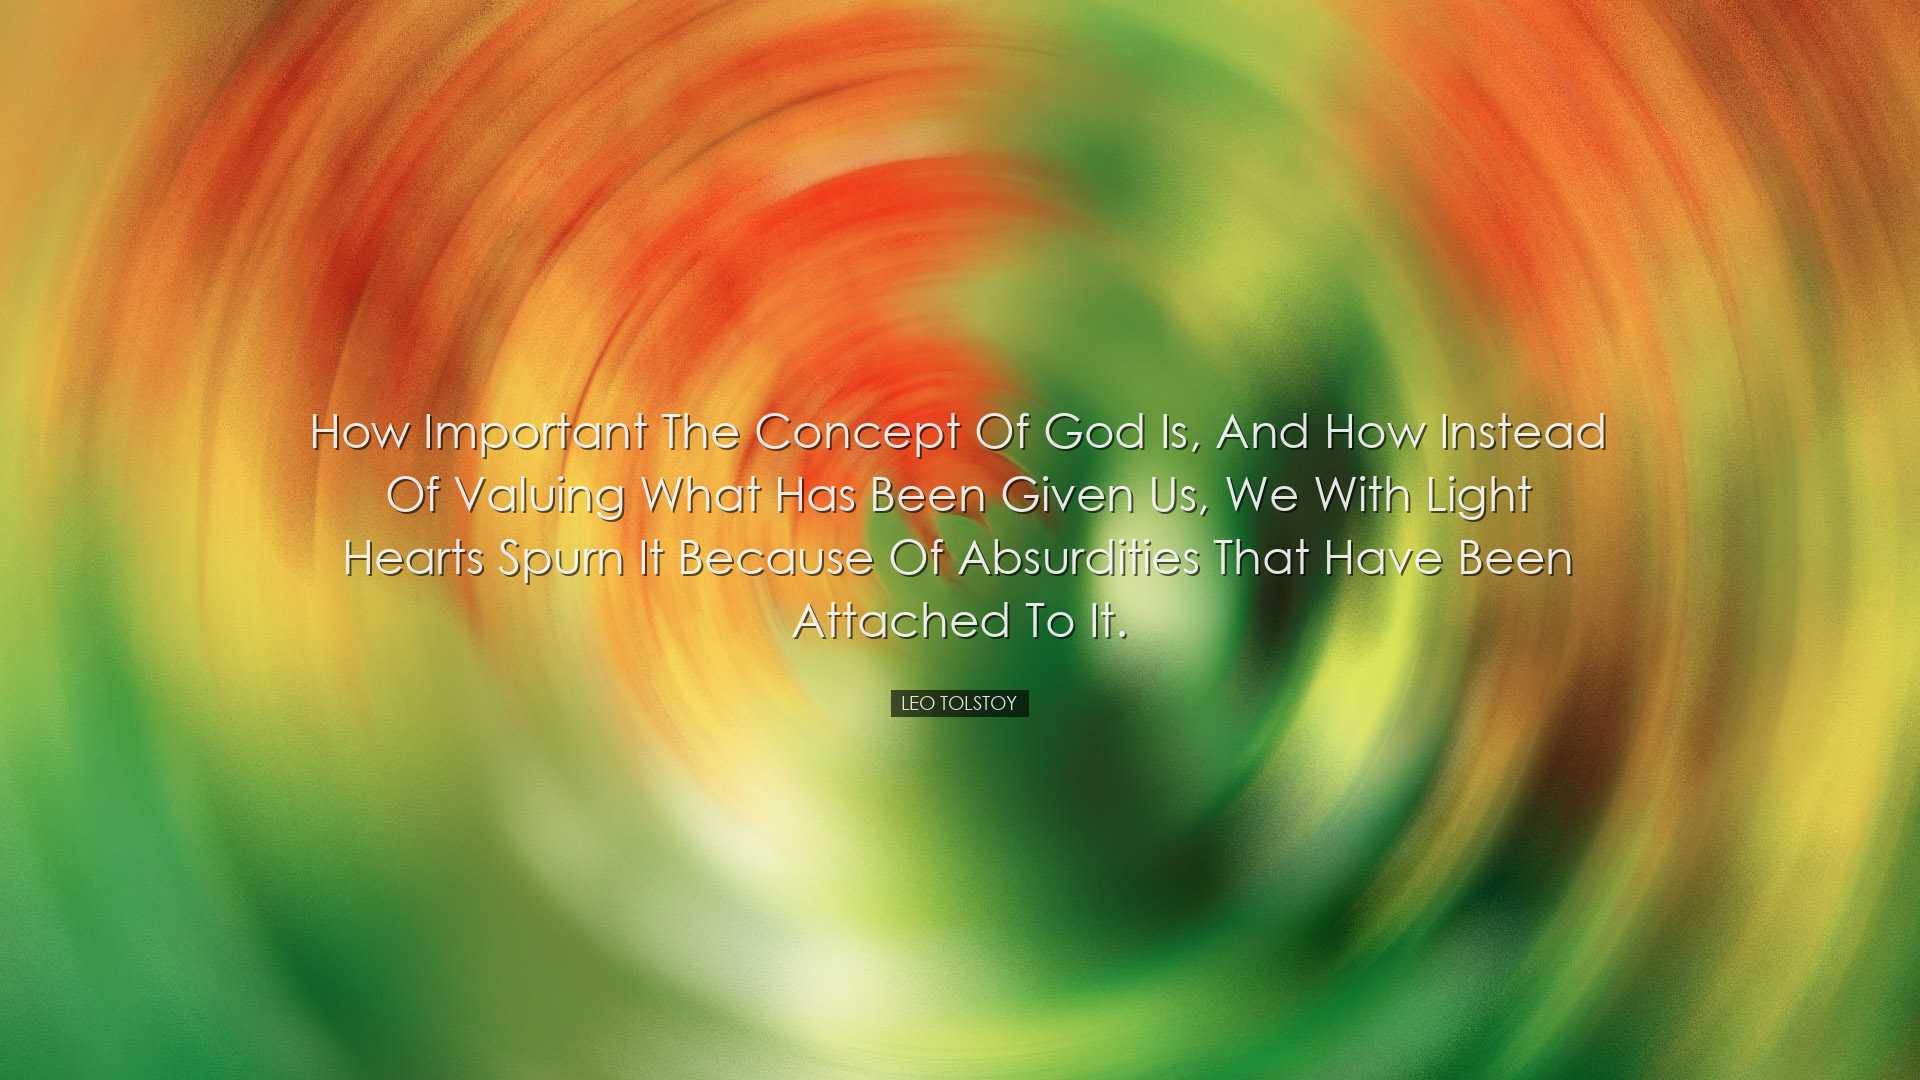 How important the concept of God is, and how instead of valuing wh